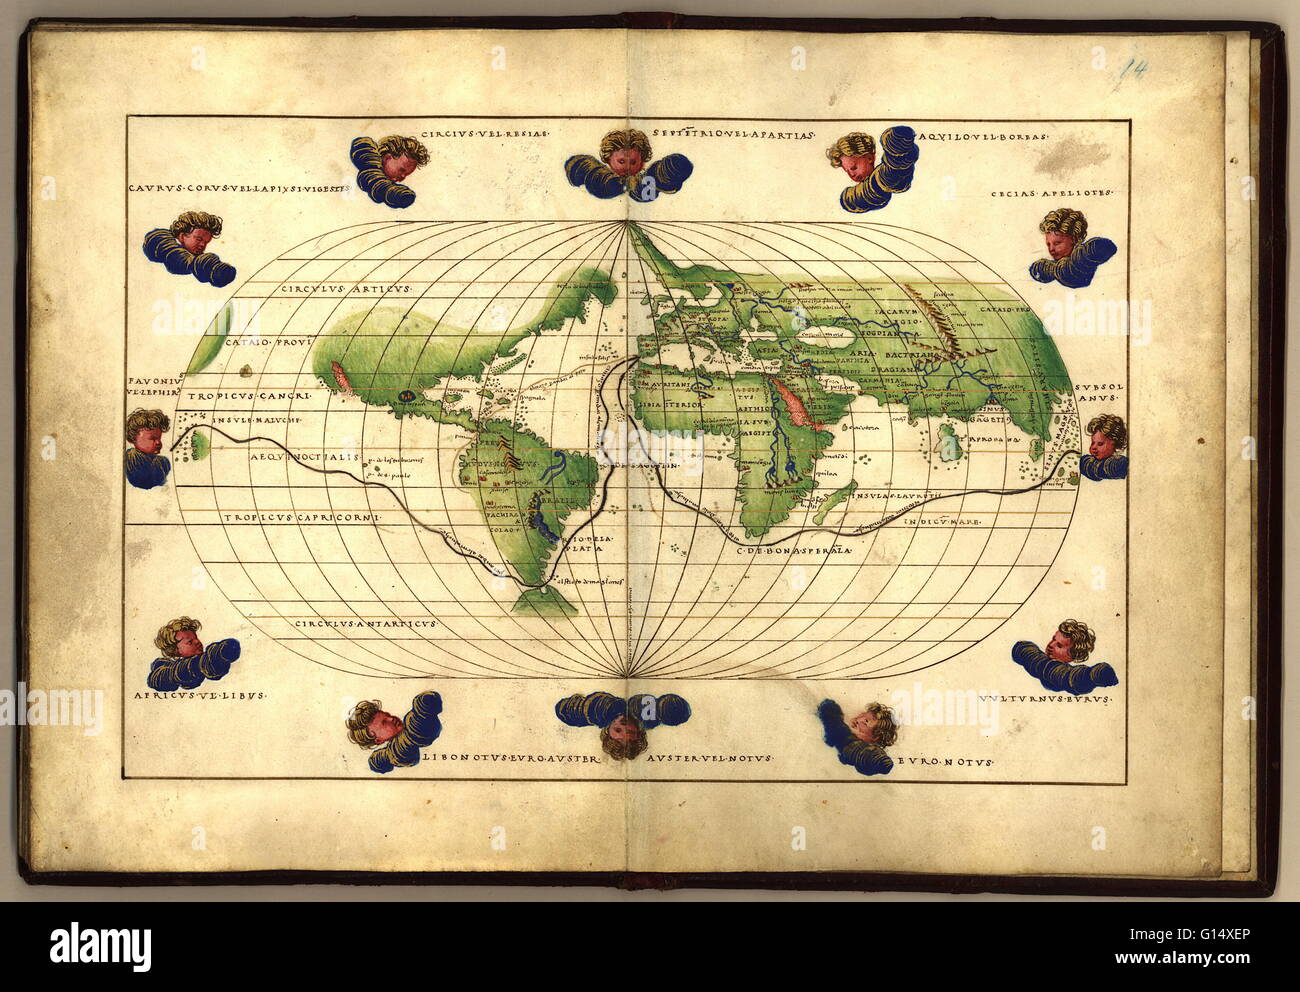 Magellan's route around the world, in a 1544 copy of the Agnese Atlas. Magellan's route is shown as a dark line. Ferdinand Magellan (c.1480-1521) set sail from Seville, Spain, in August 1519 with five ships. He sailed south and west around the tip of Sout Stock Photo